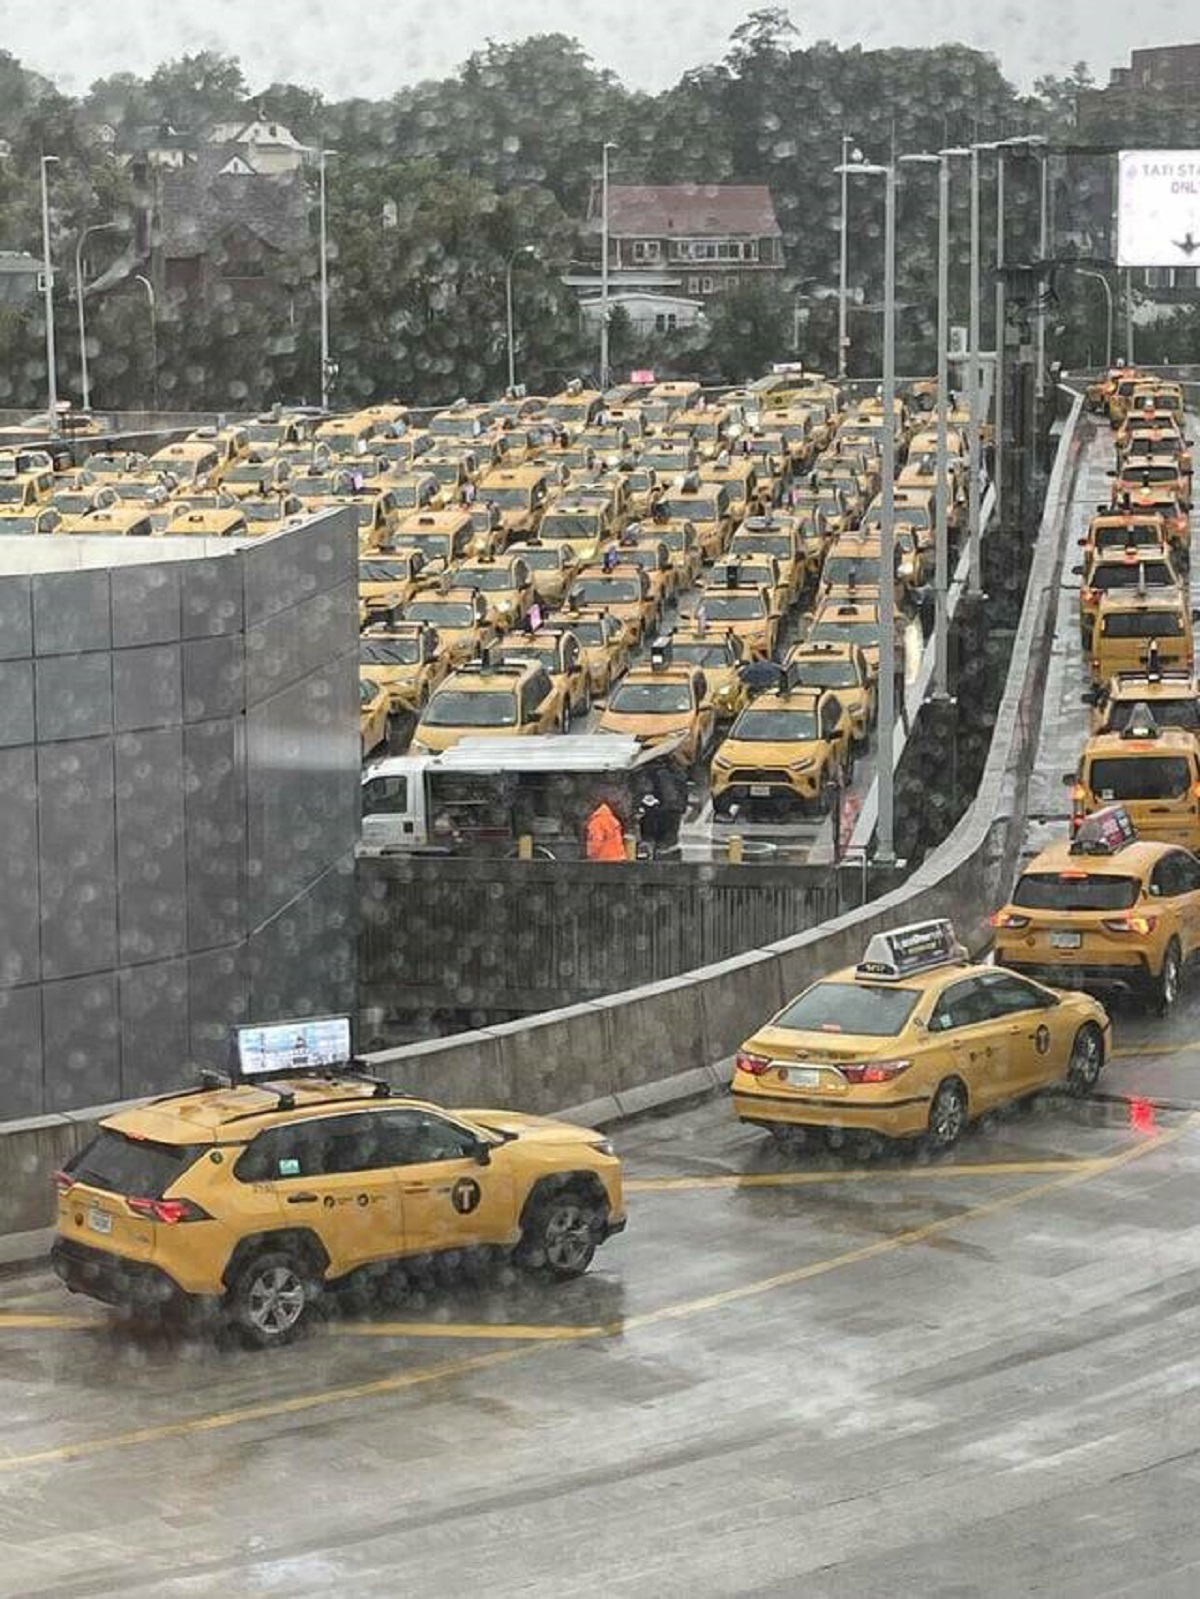 "Cabs and more cabs lining up to pick up passengers at LaGuardia"